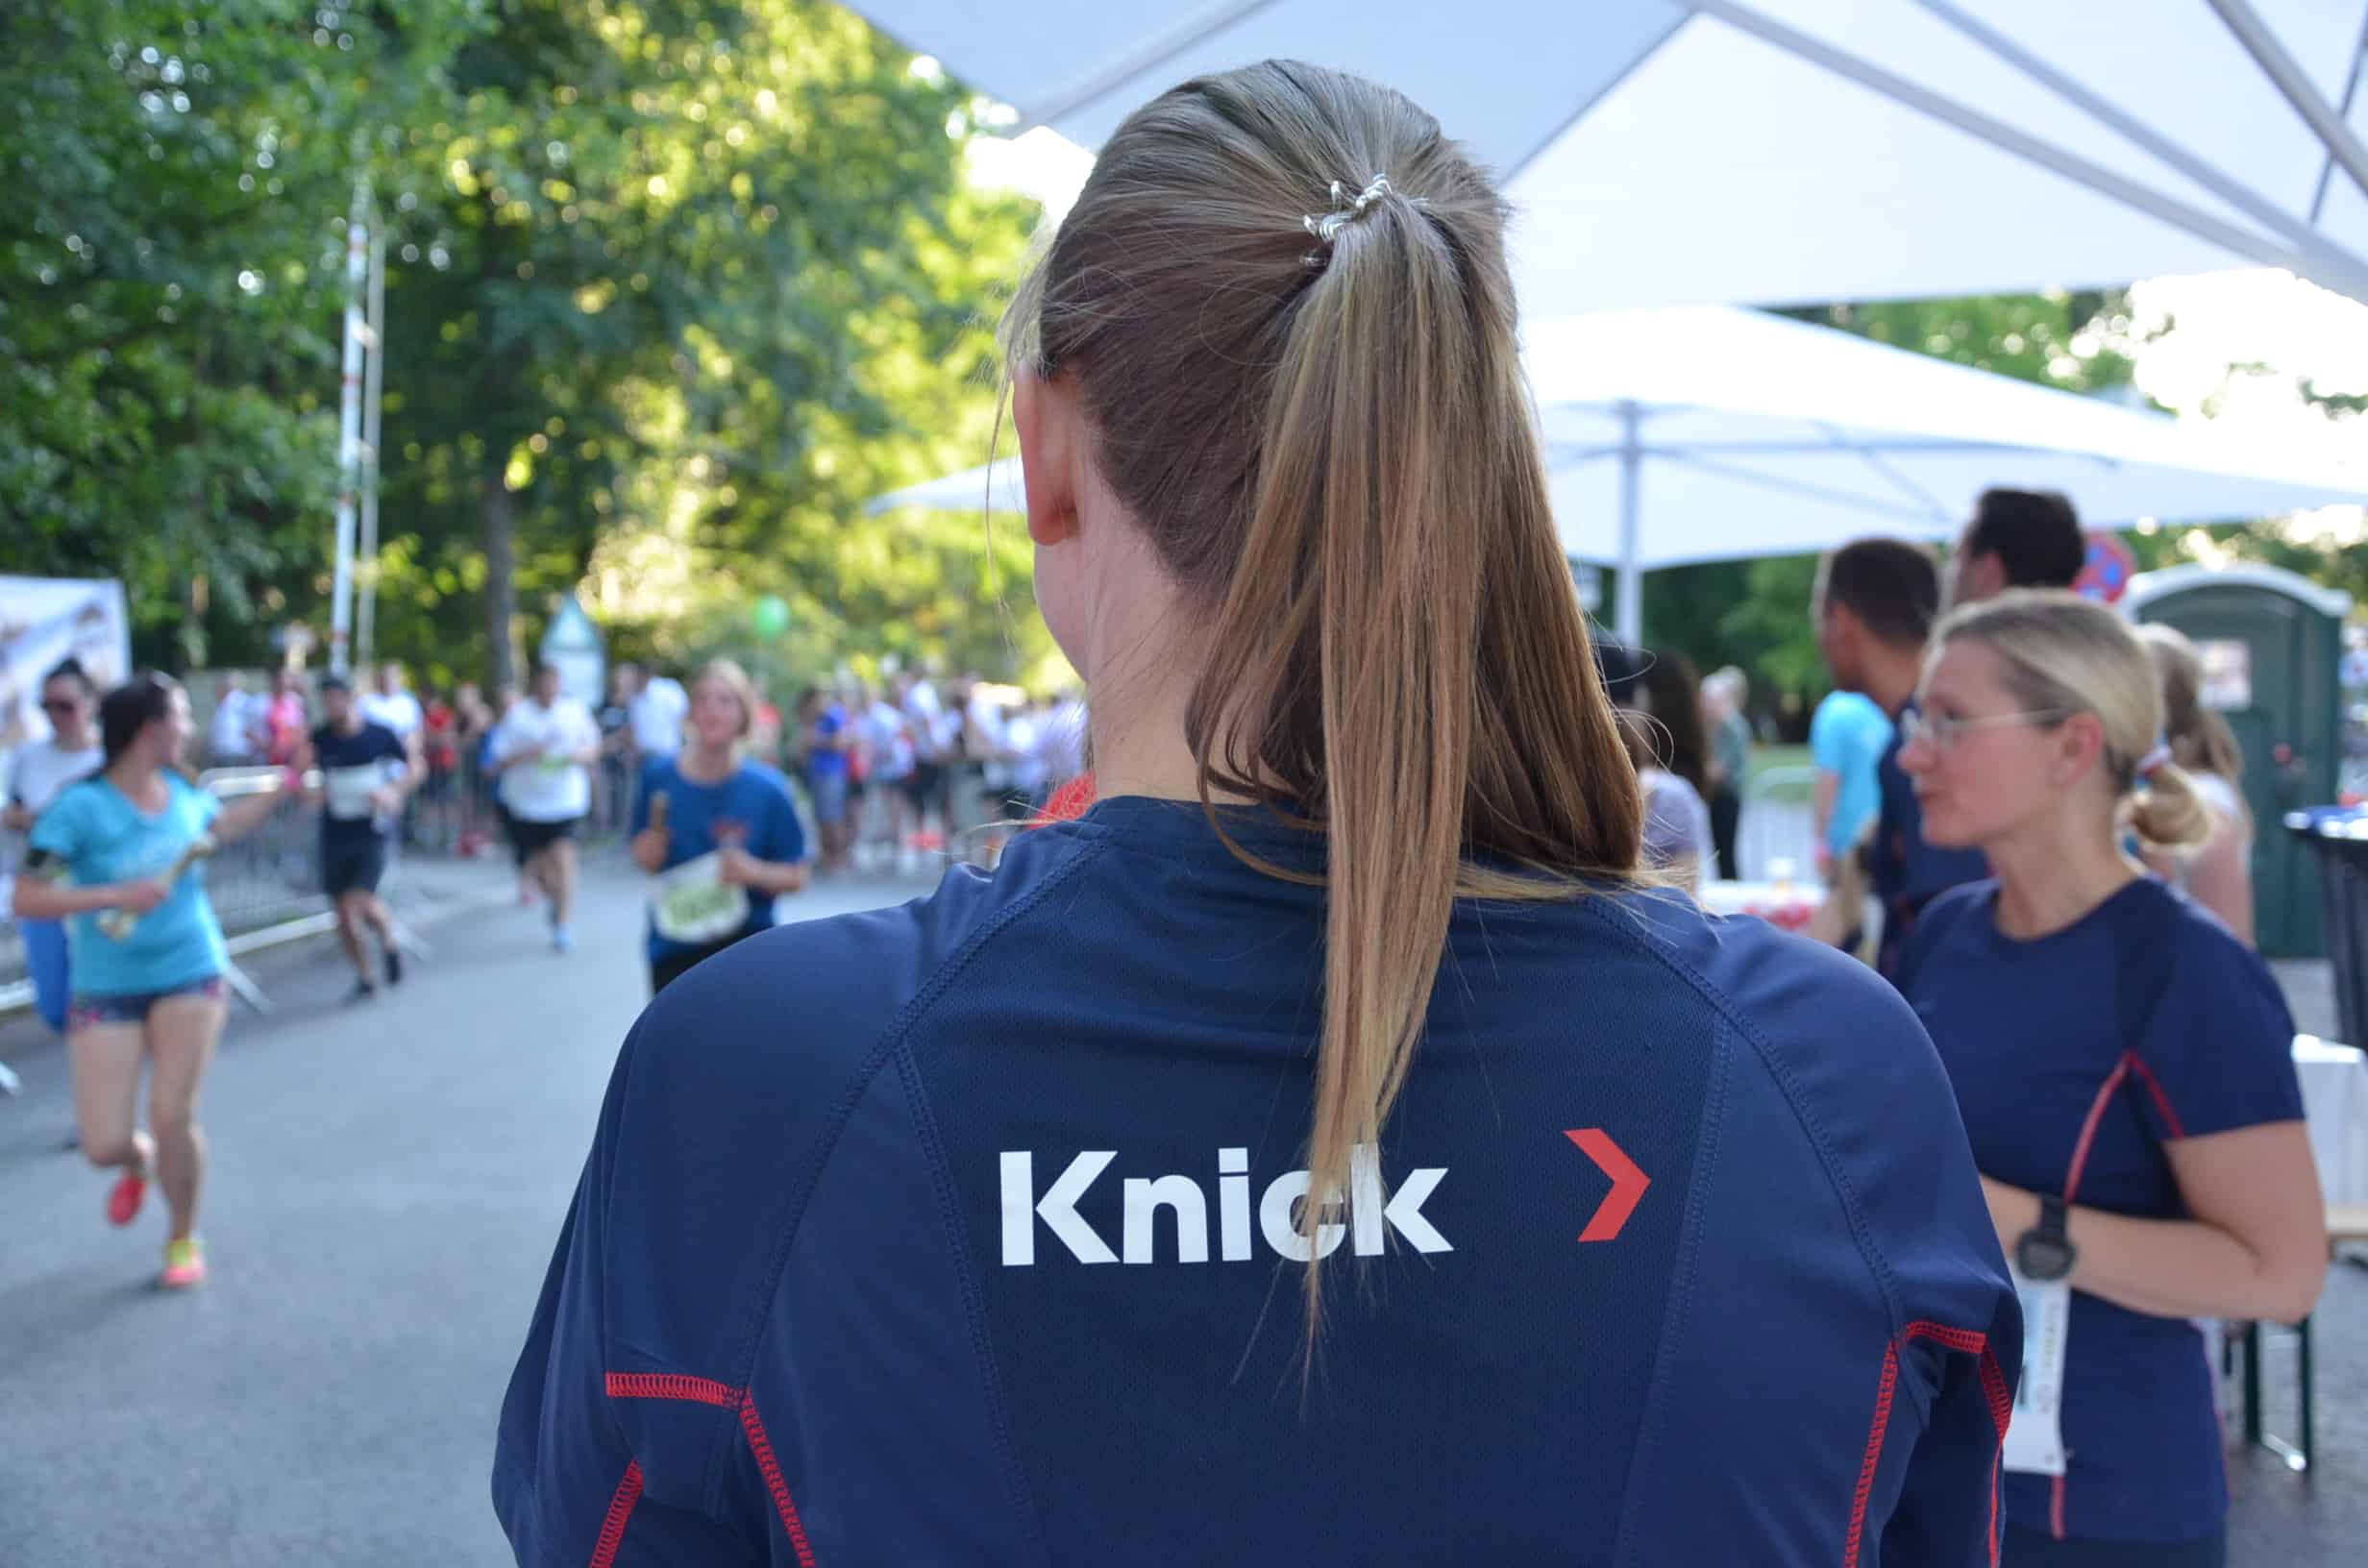 A female employee with ponytail and blue runner's shirt with the Knick logo on the back watches runners at a relay race in Berlin under large white umbrellas